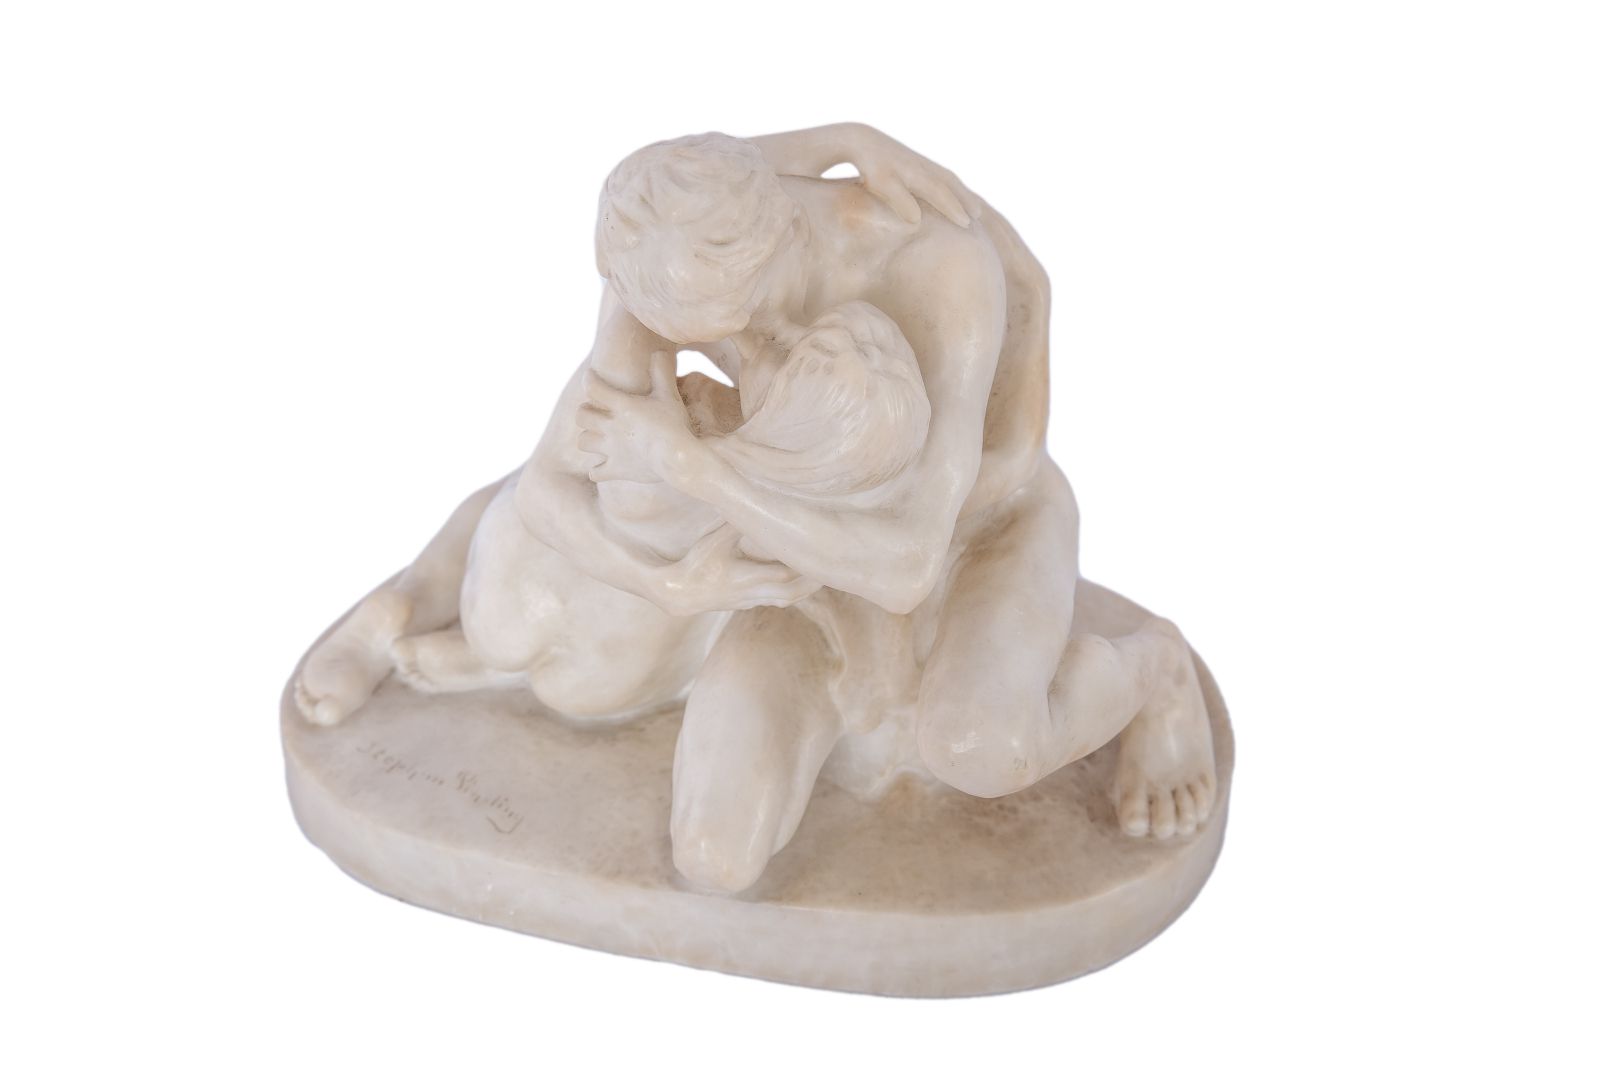 Null Stephan Abel SINDING (1846-1922)

The kiss

Alabaster sculpture, signed on &hellip;